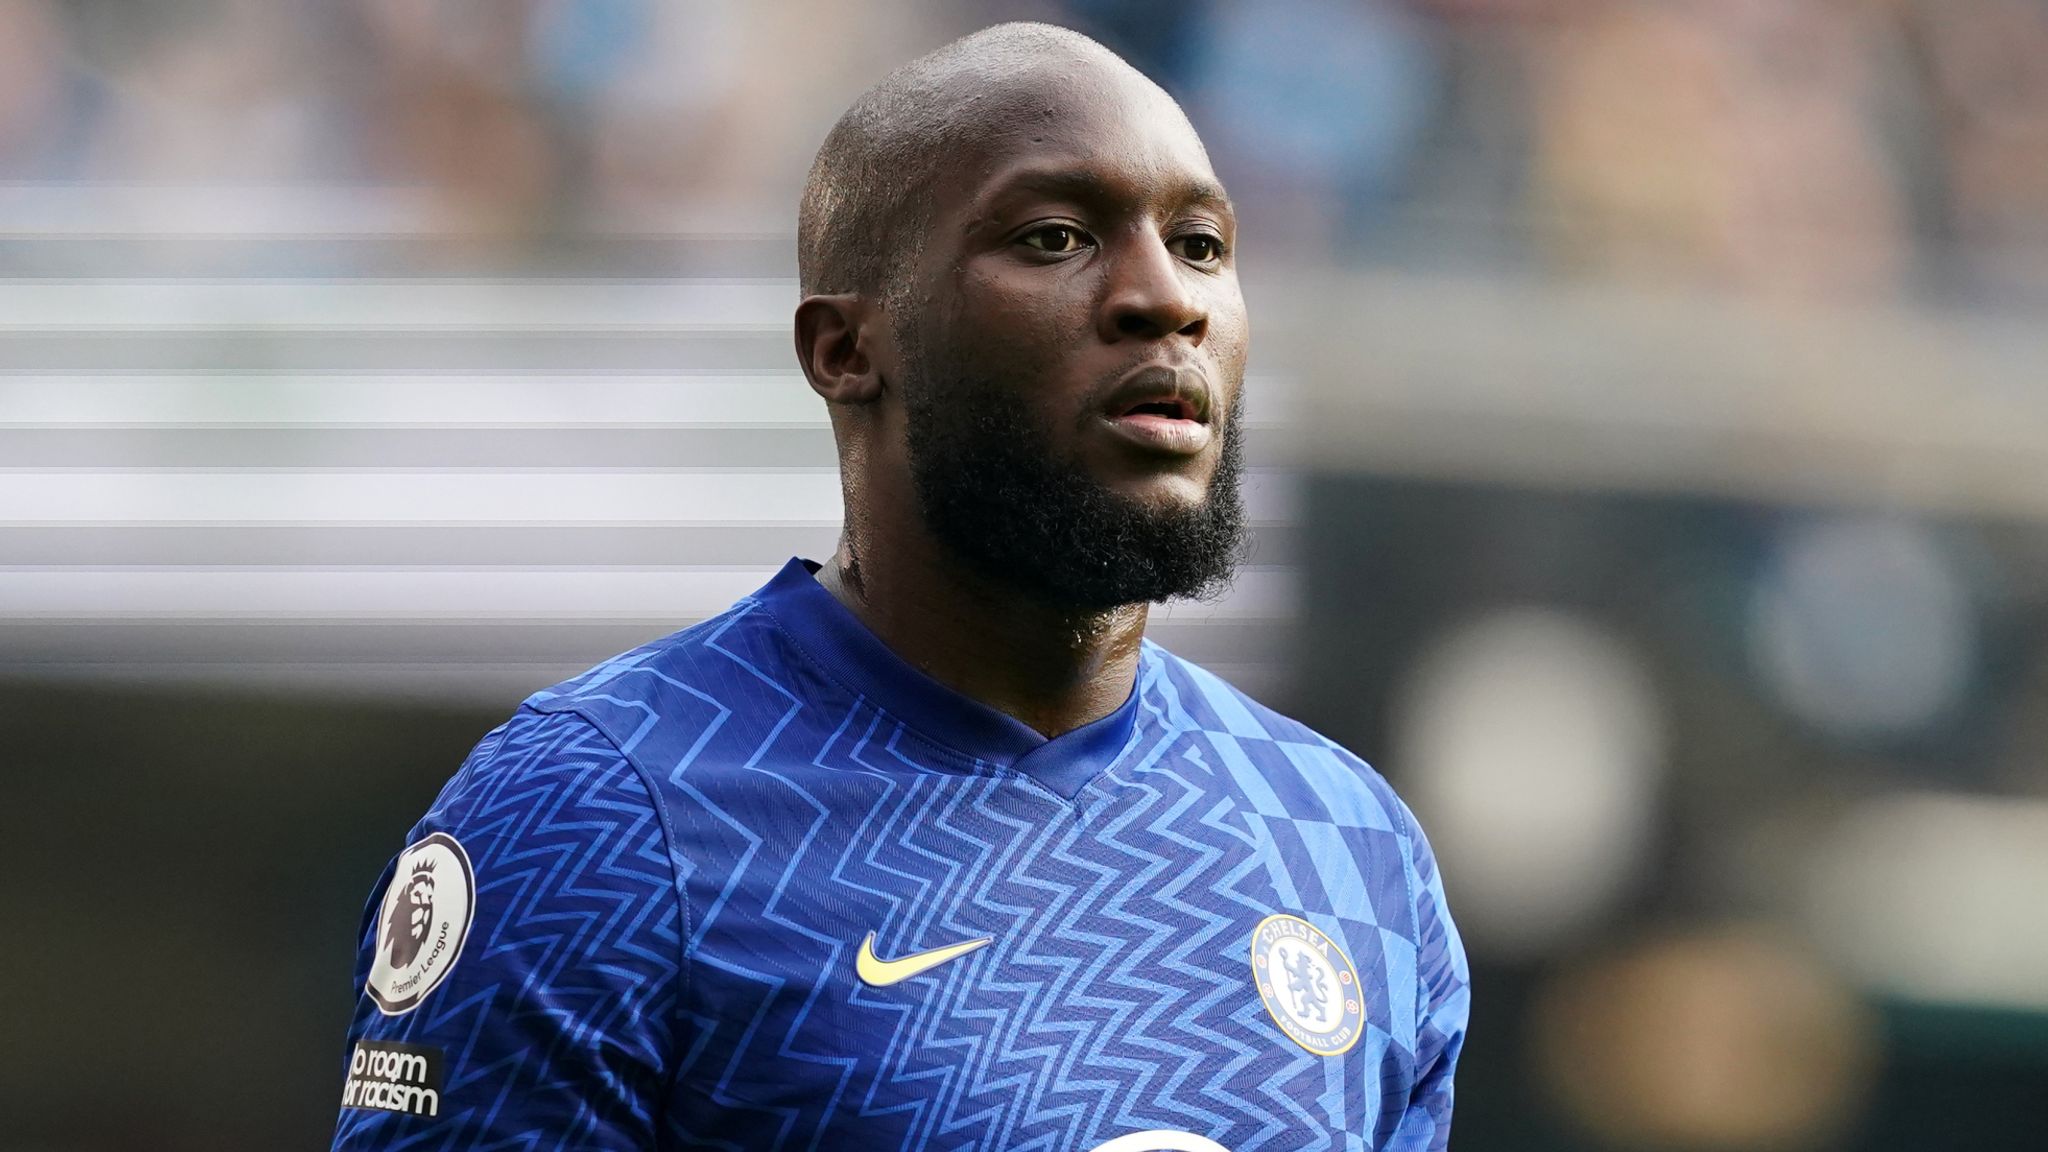 Teo Spurs are contemplating a move for Romelu Lukaku as a potential replacement for Harry Kane. !g - LifeAnimal